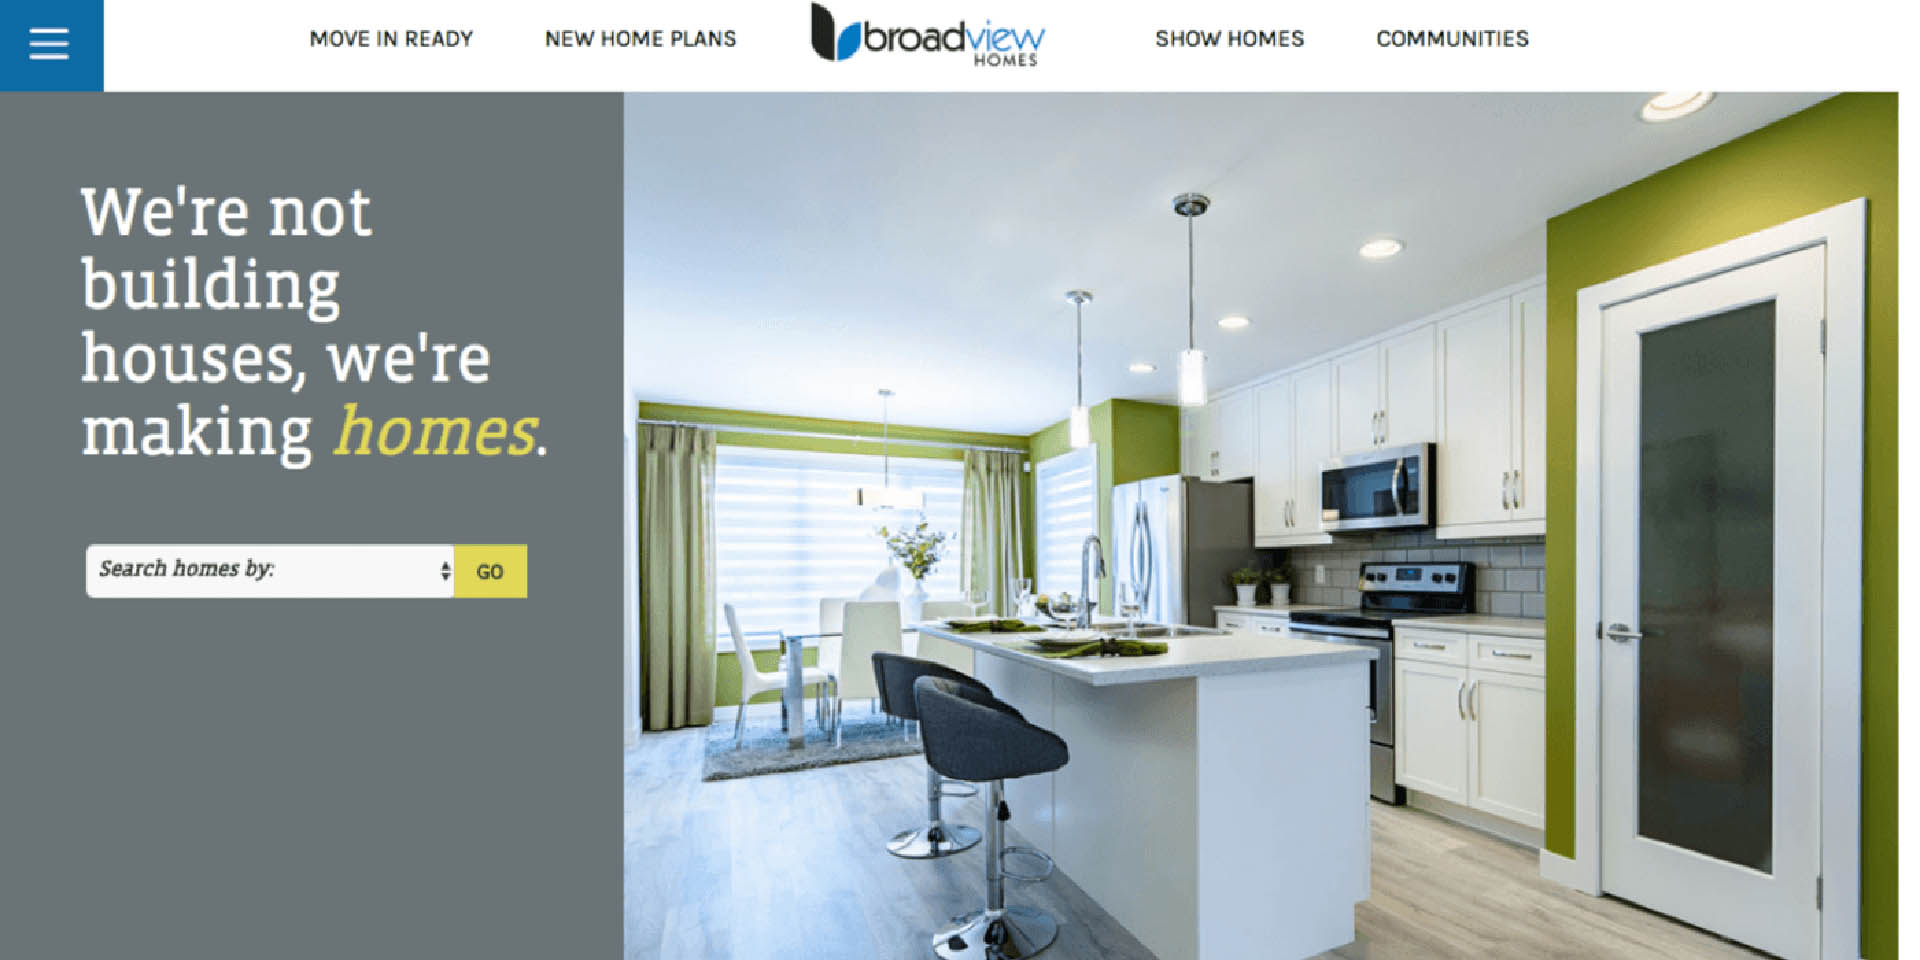 broadview-homes-new-website-featured-image